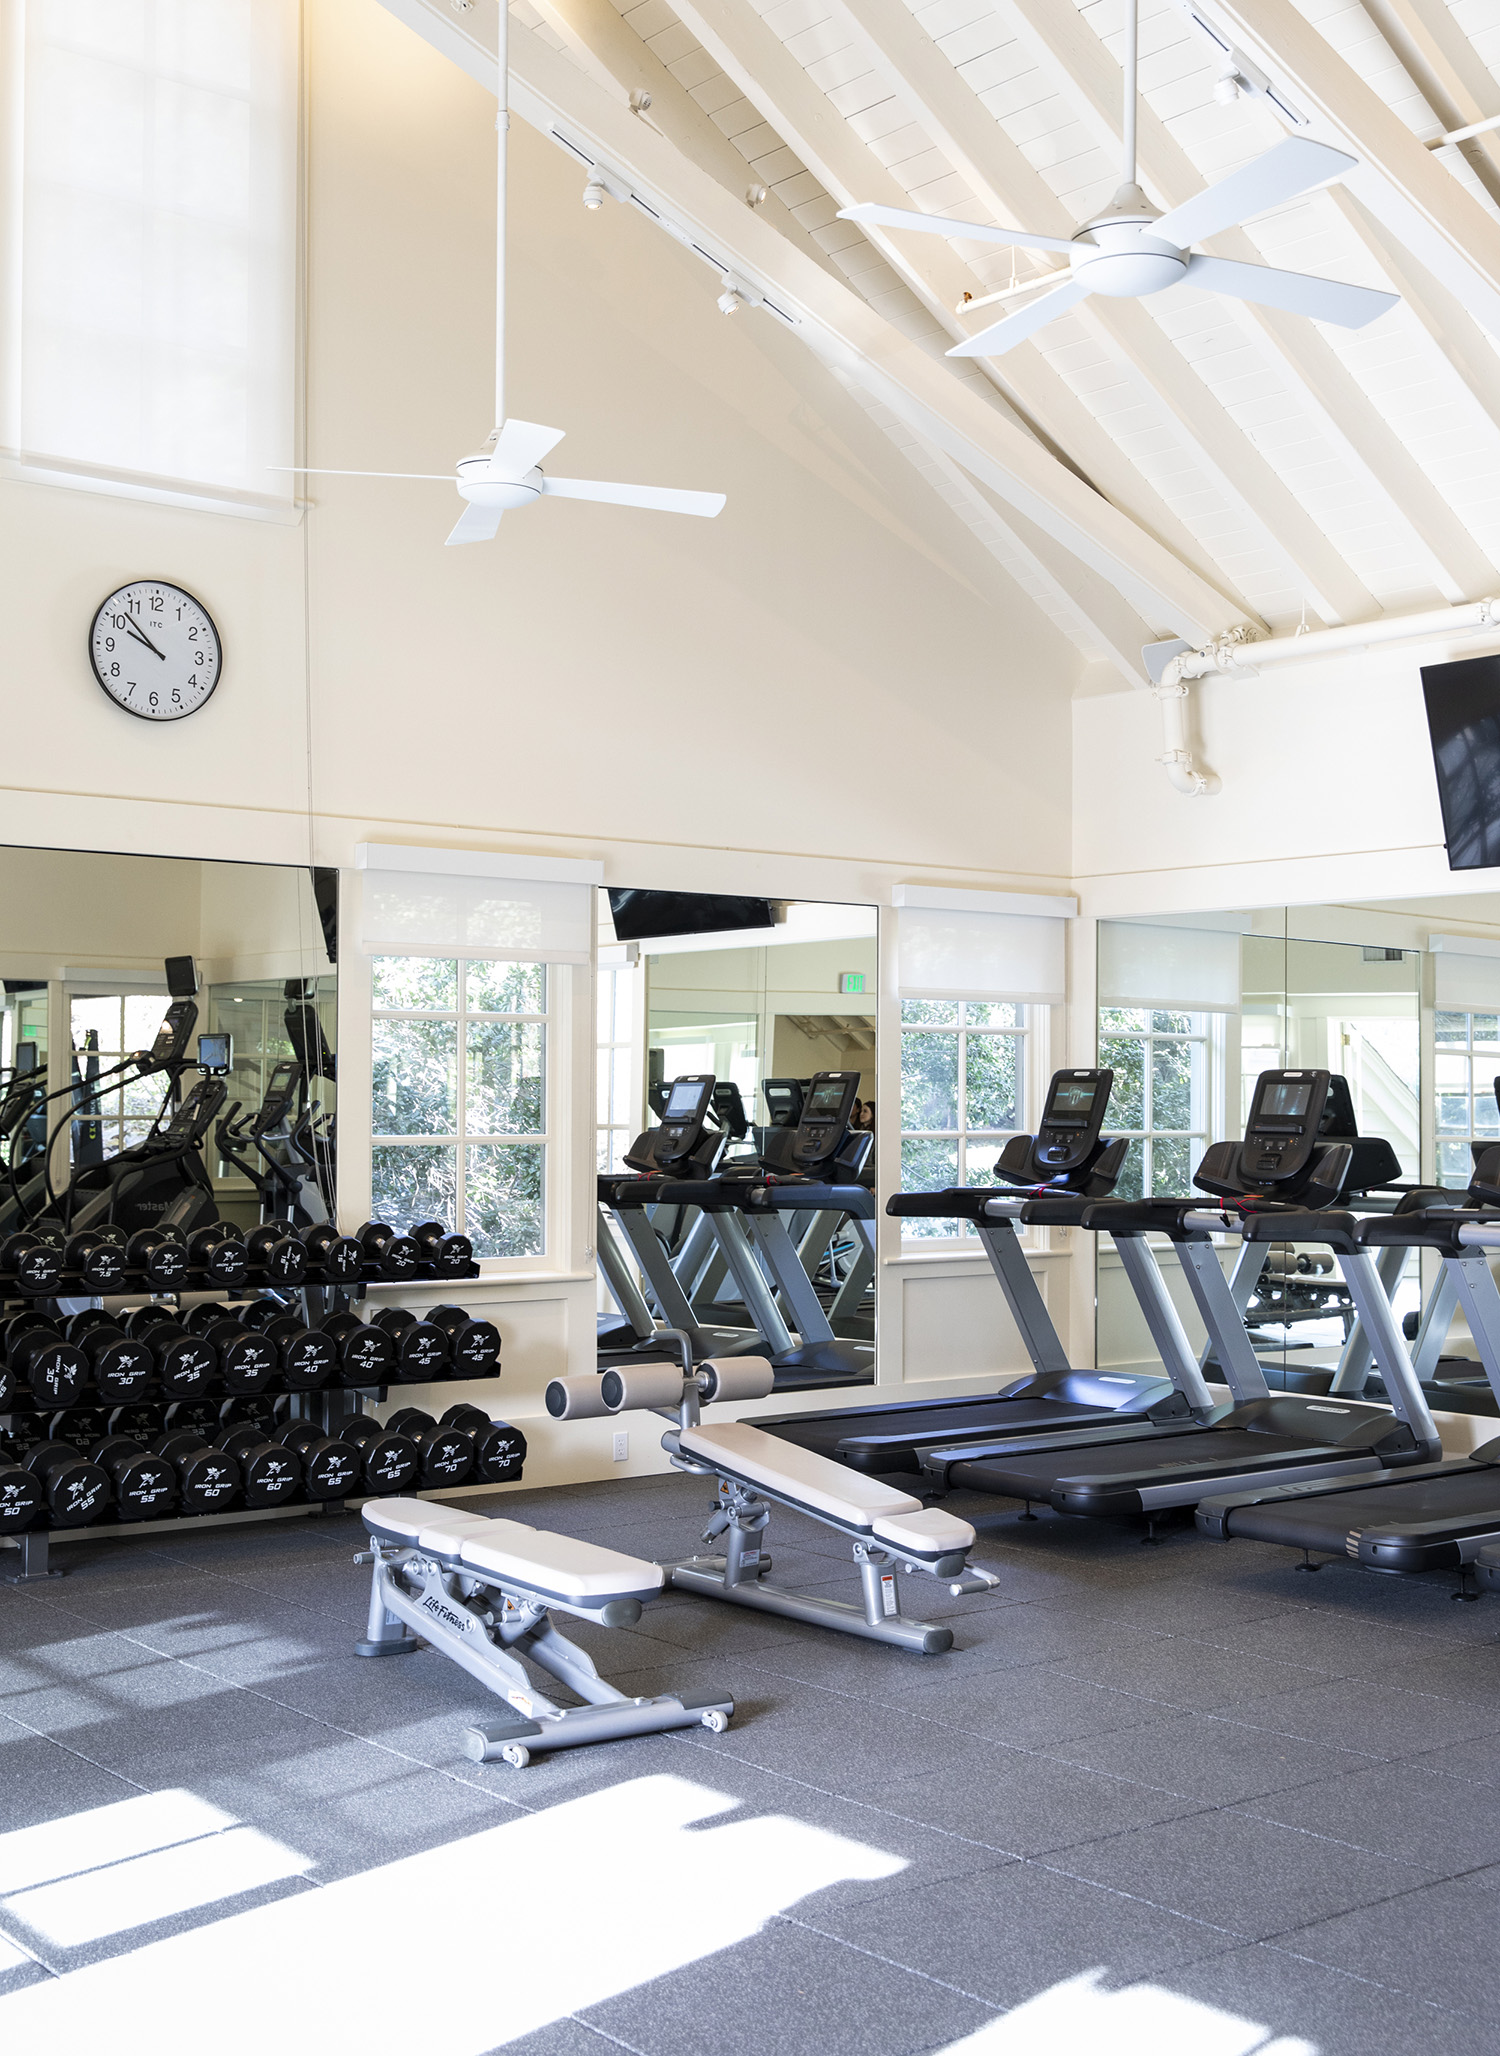 Fitness room with treadmills and free weights